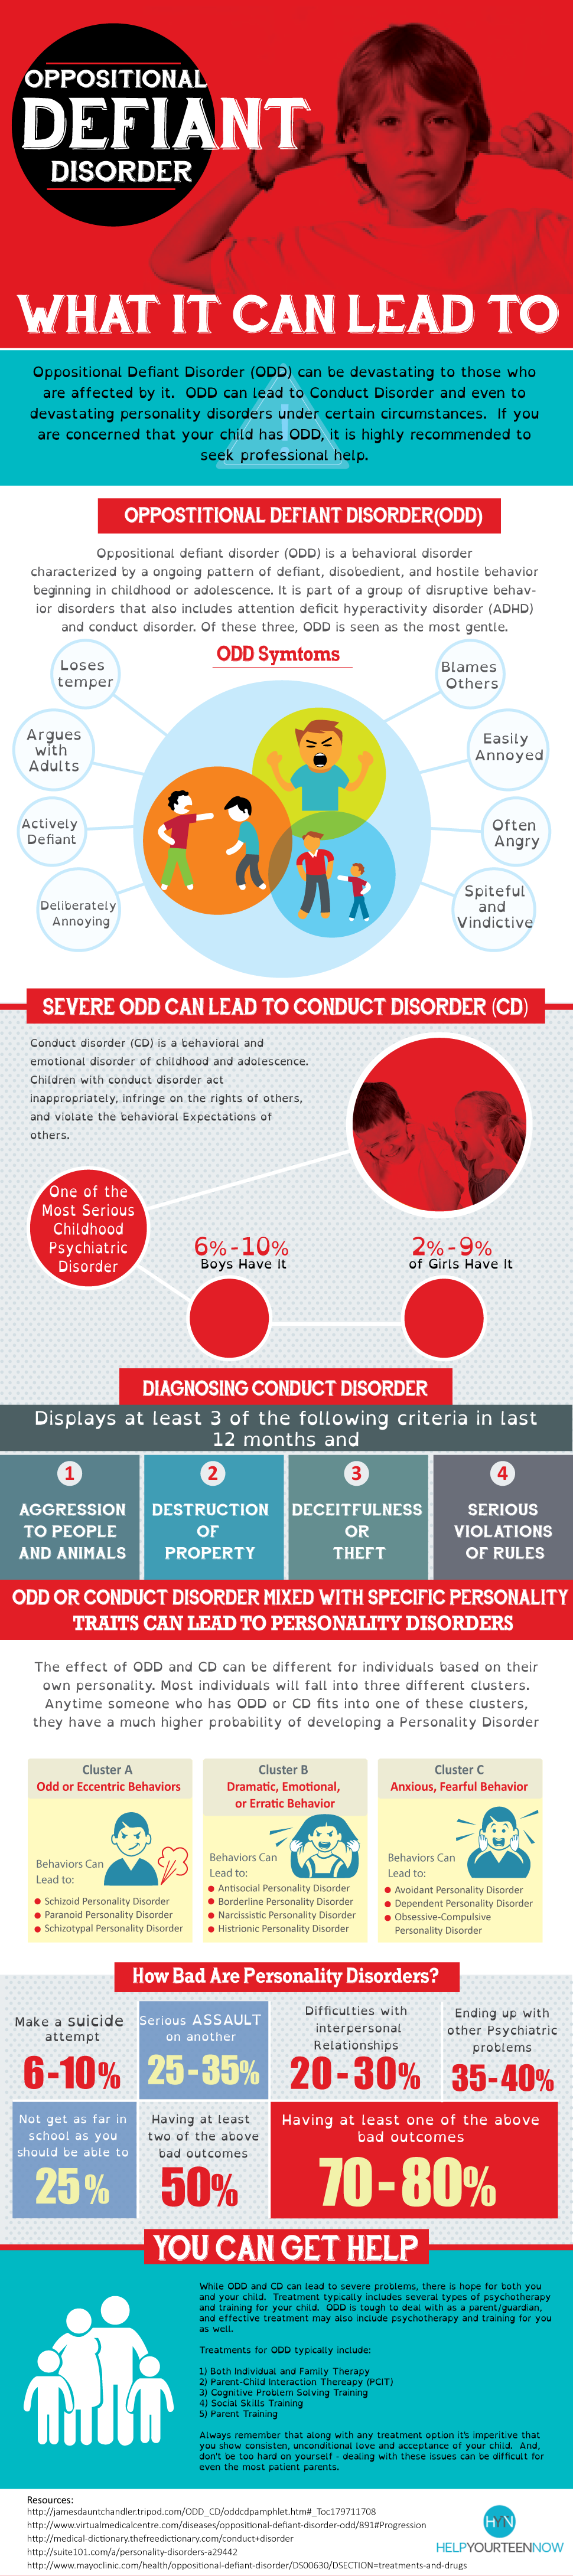 Oppositional Defiant Disorder Facts and Trends